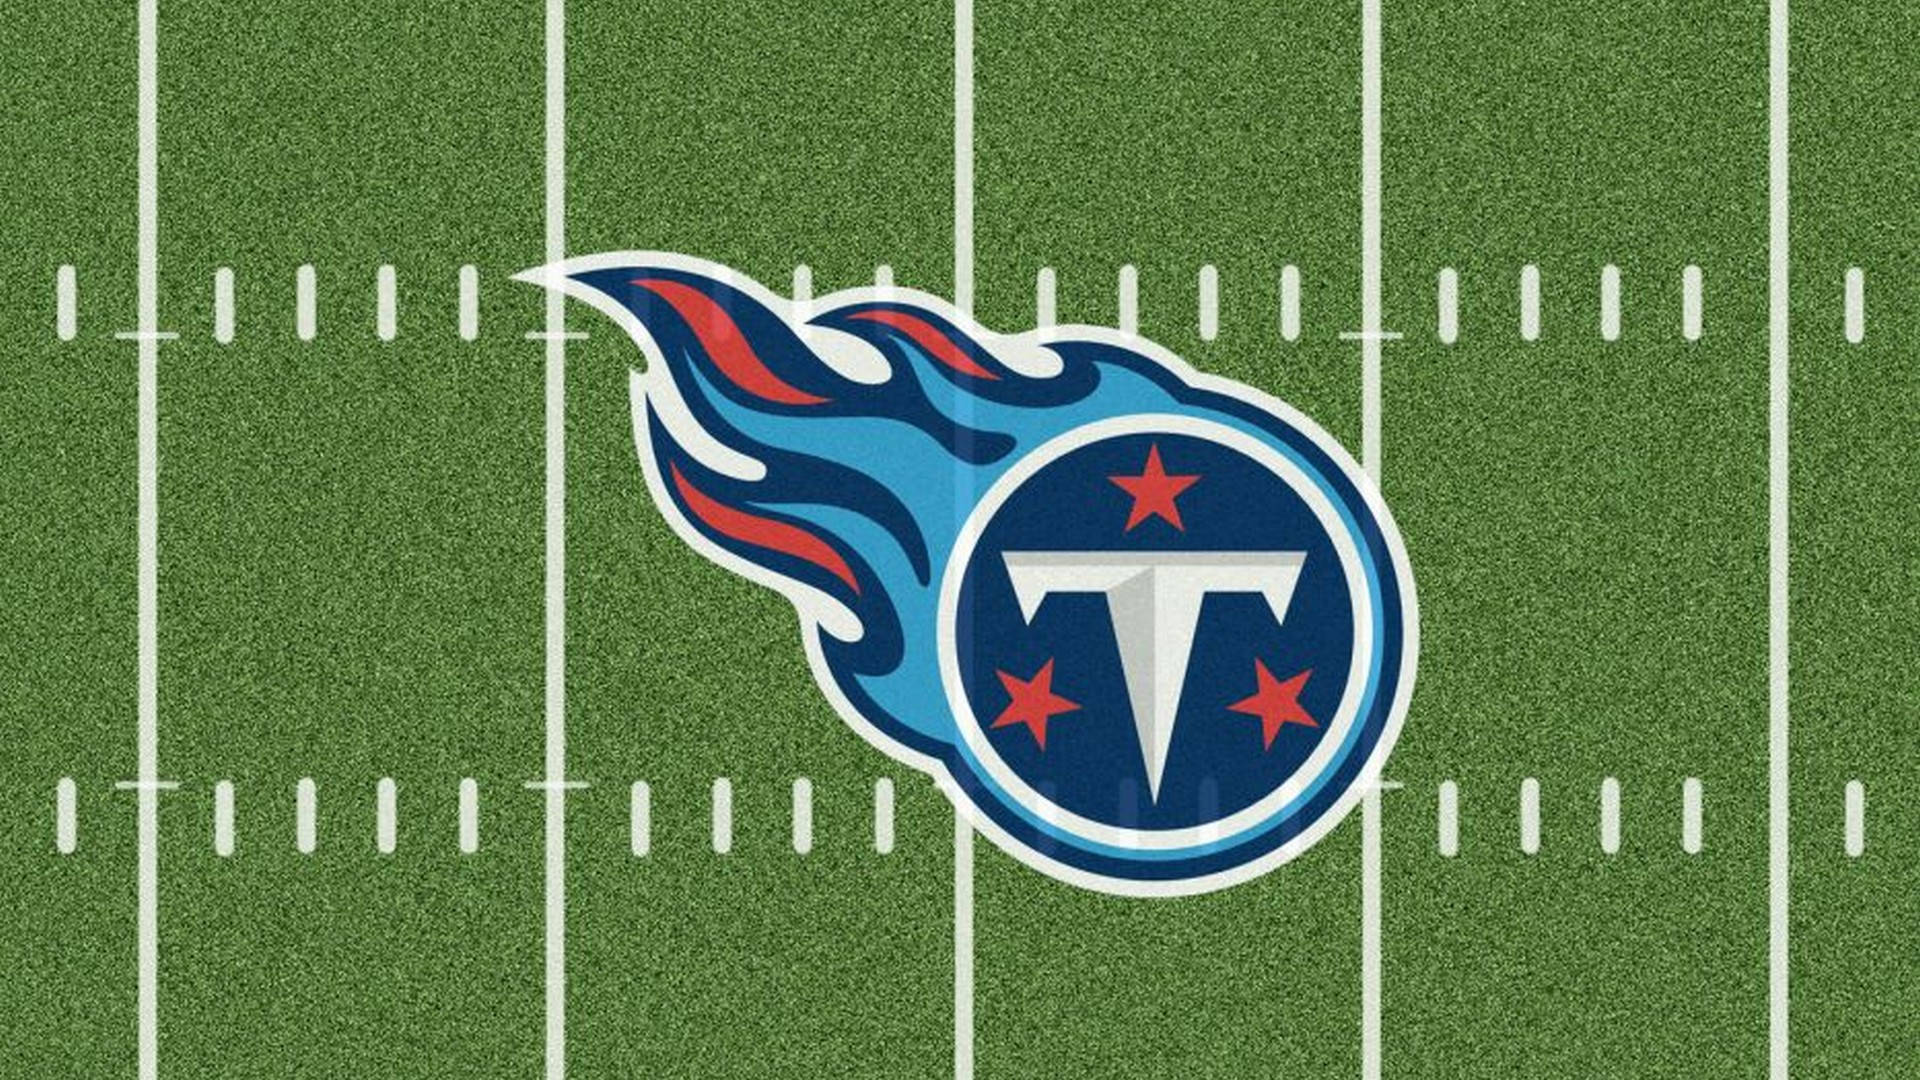 Tennessee Titans Football Field Background